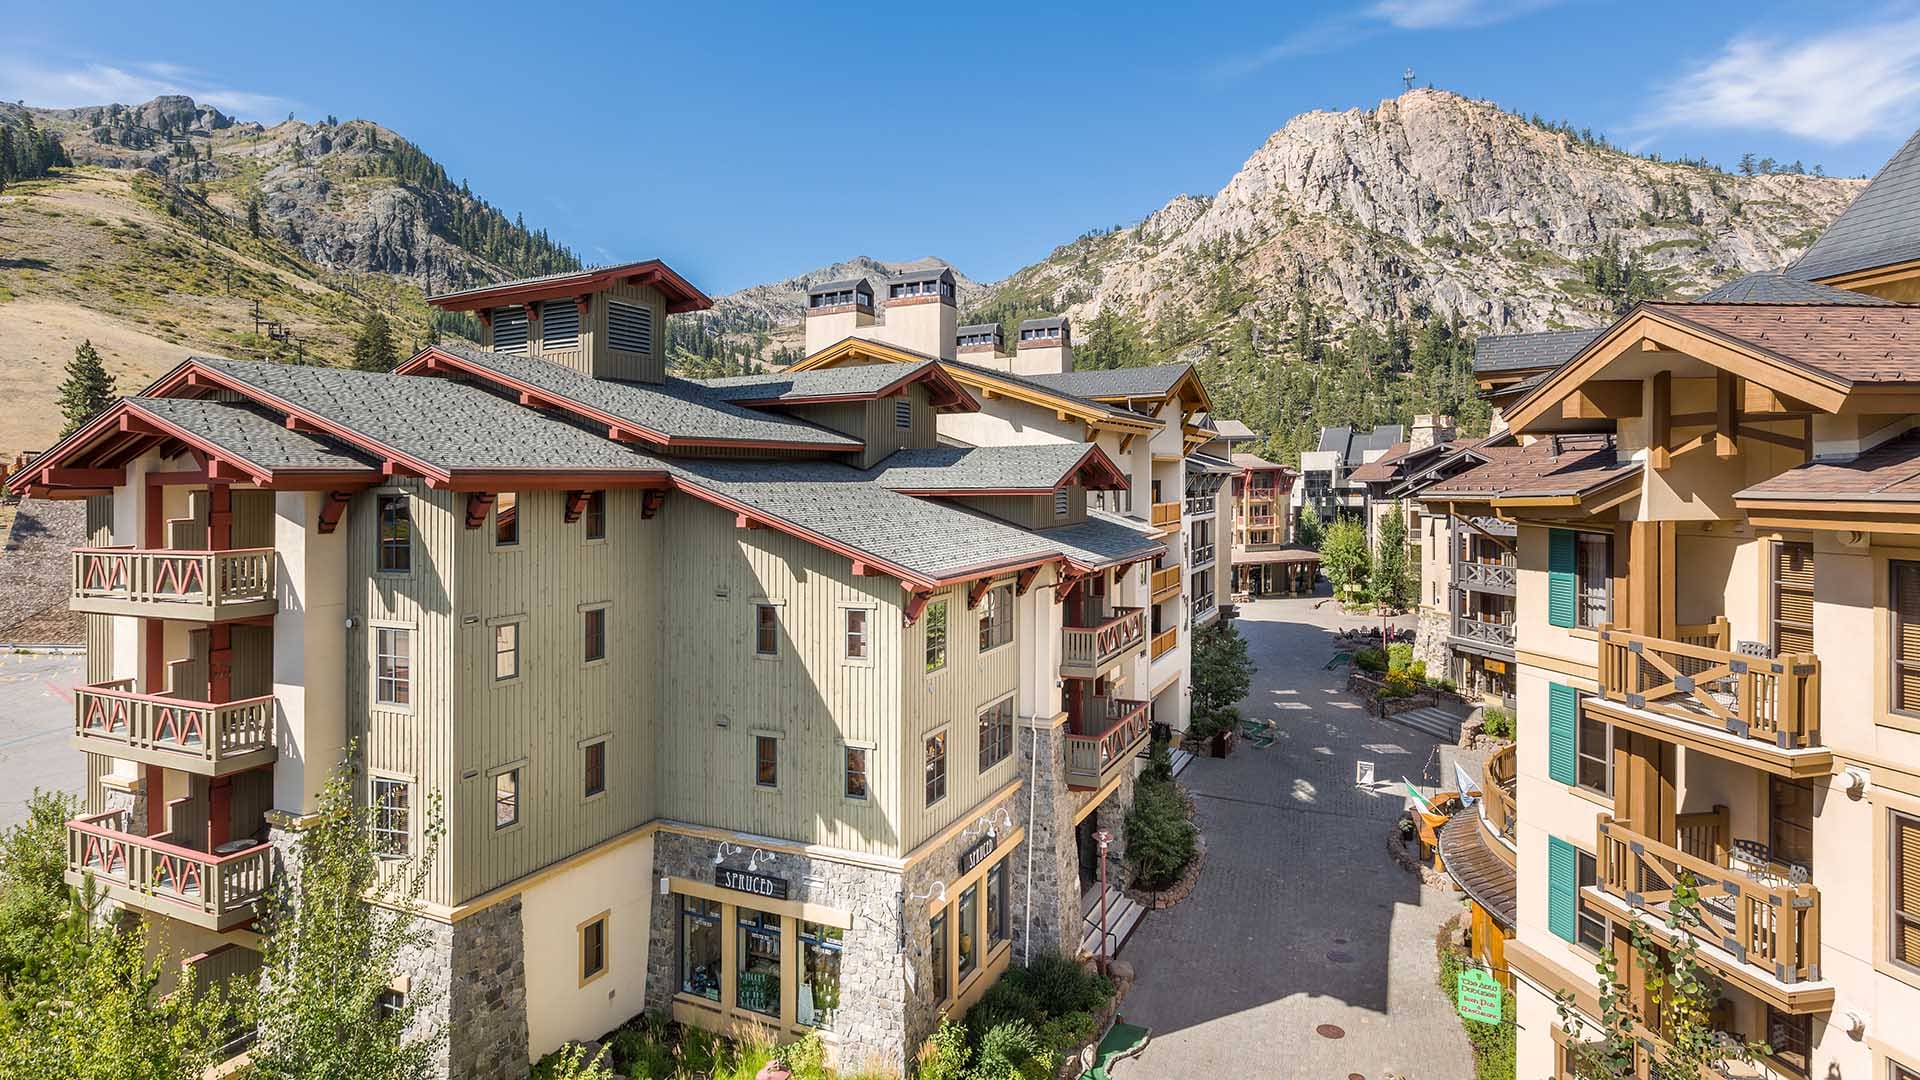 The Village at Palisades Tahoe in Summer 